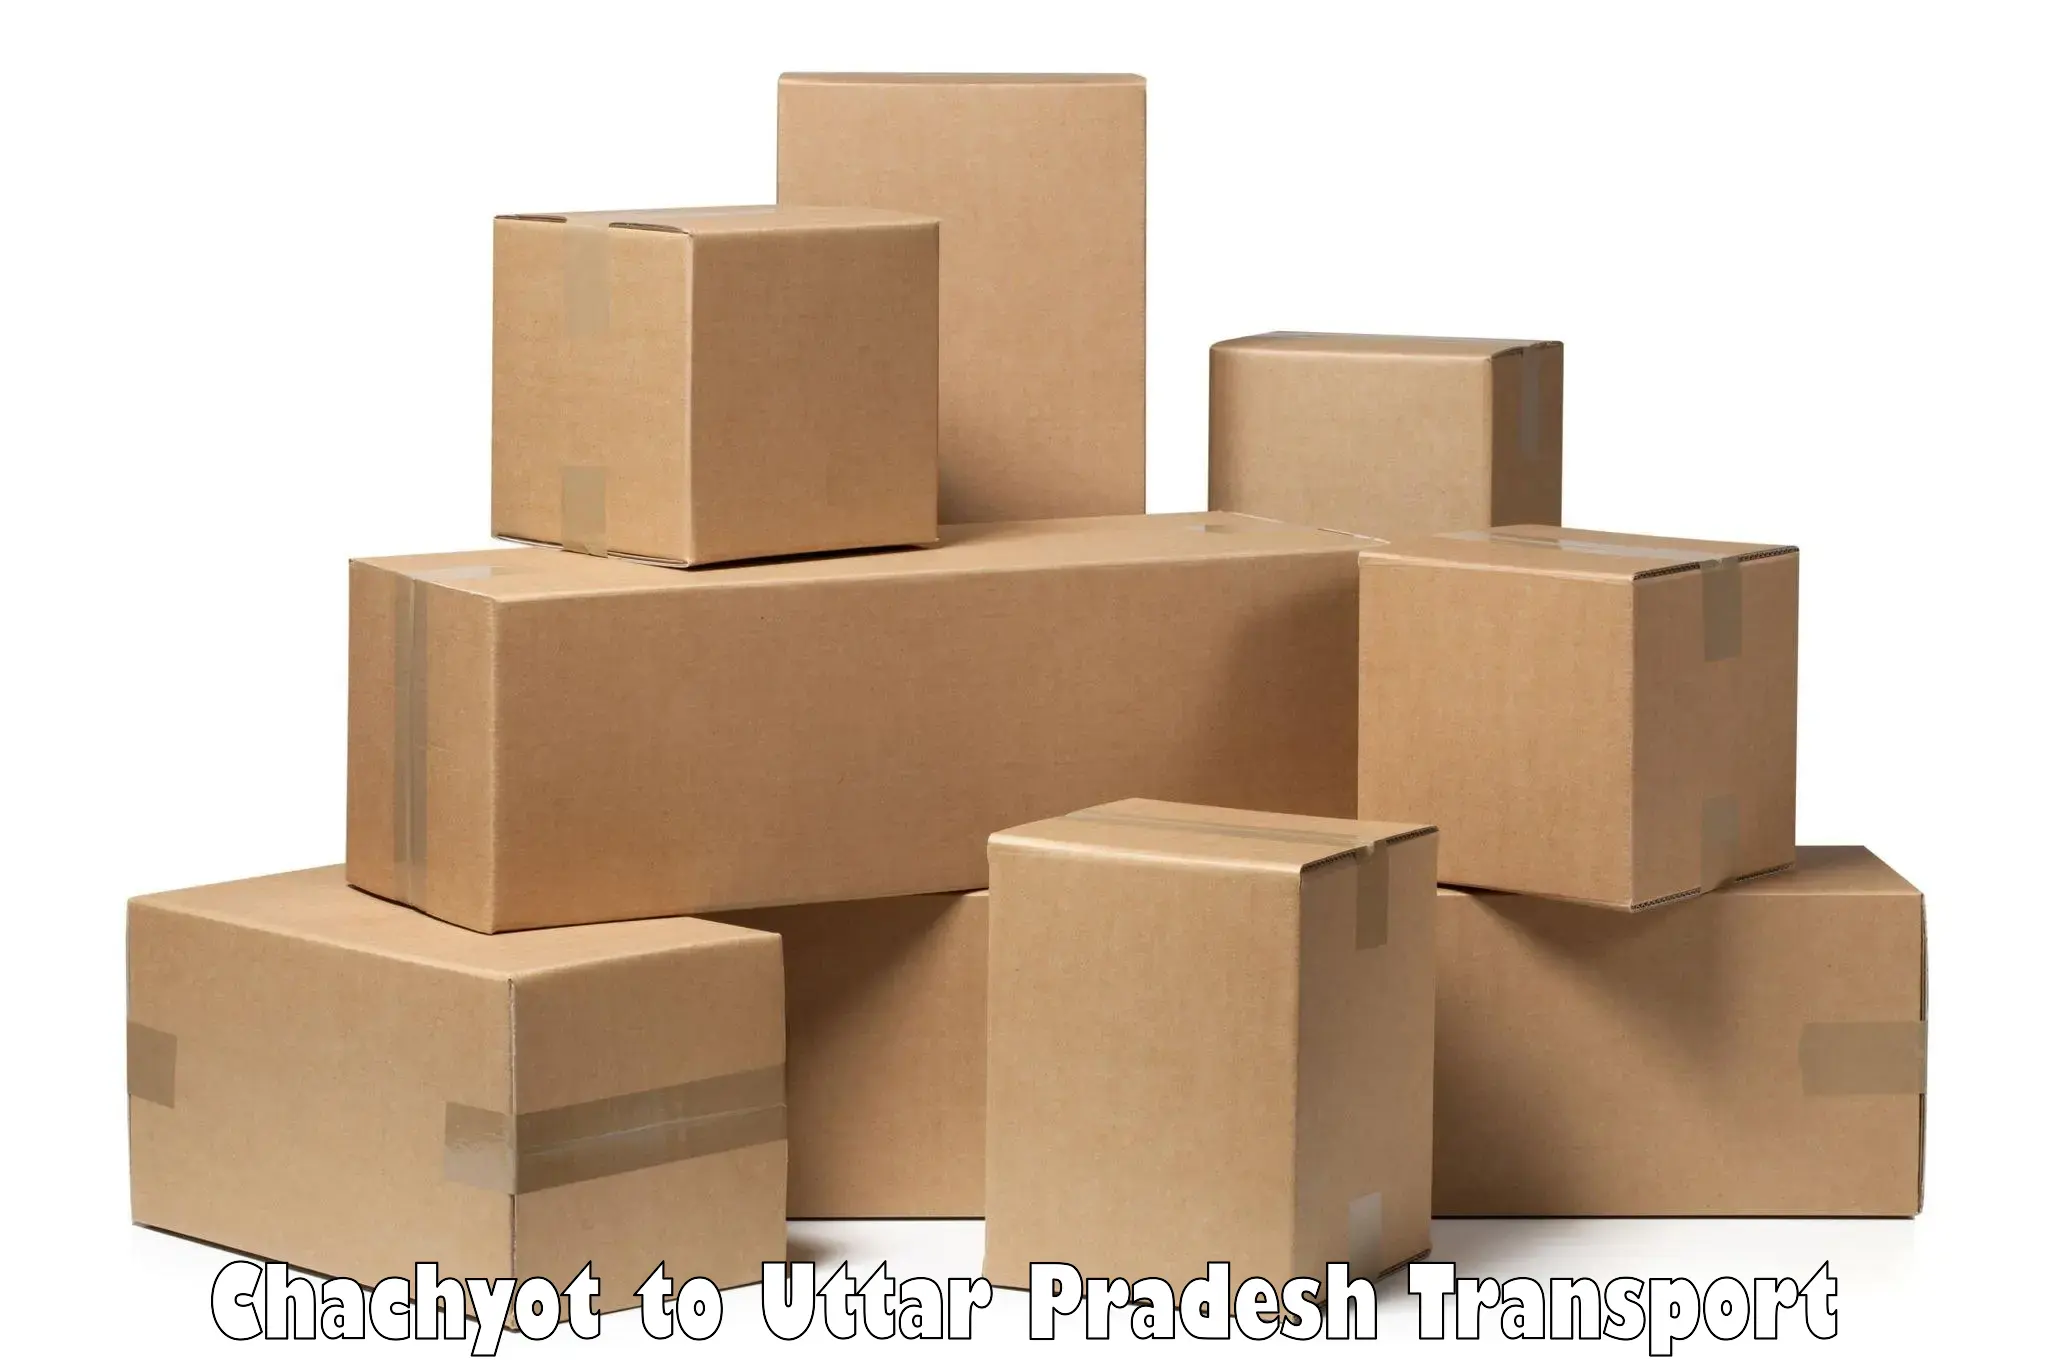 Delivery service Chachyot to Kanpur